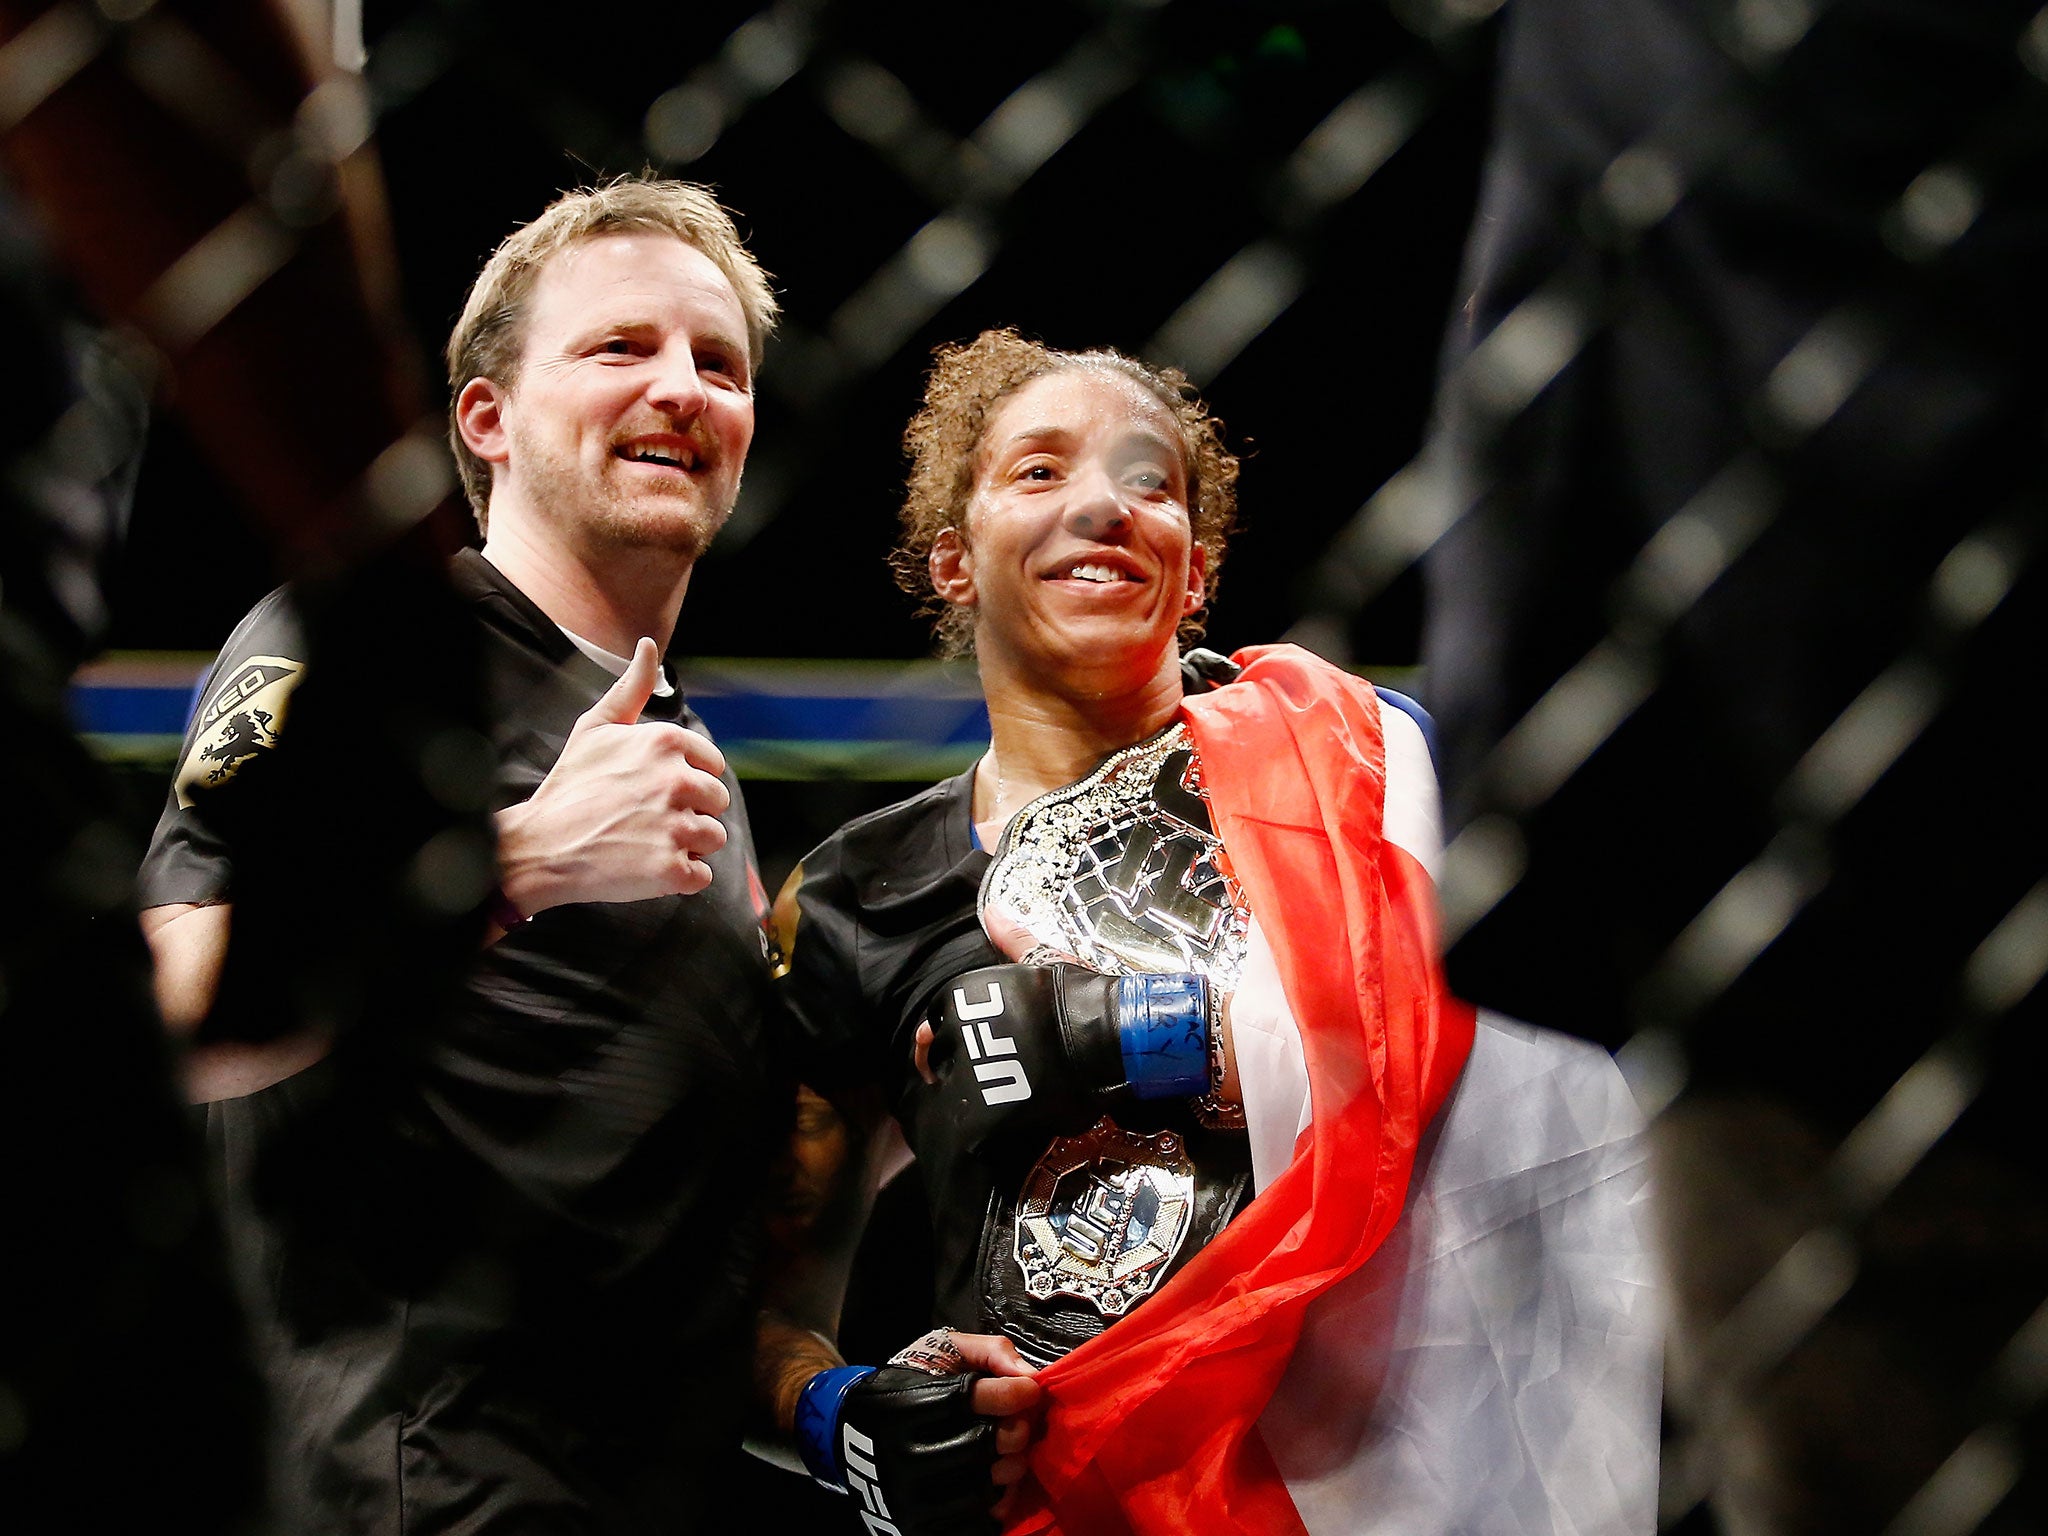 Germaine de Randamie of The Netherlands celebrates with the belt after defeating Holly Holm of United States in their UFC women's featherweight championship bout during UFC 208